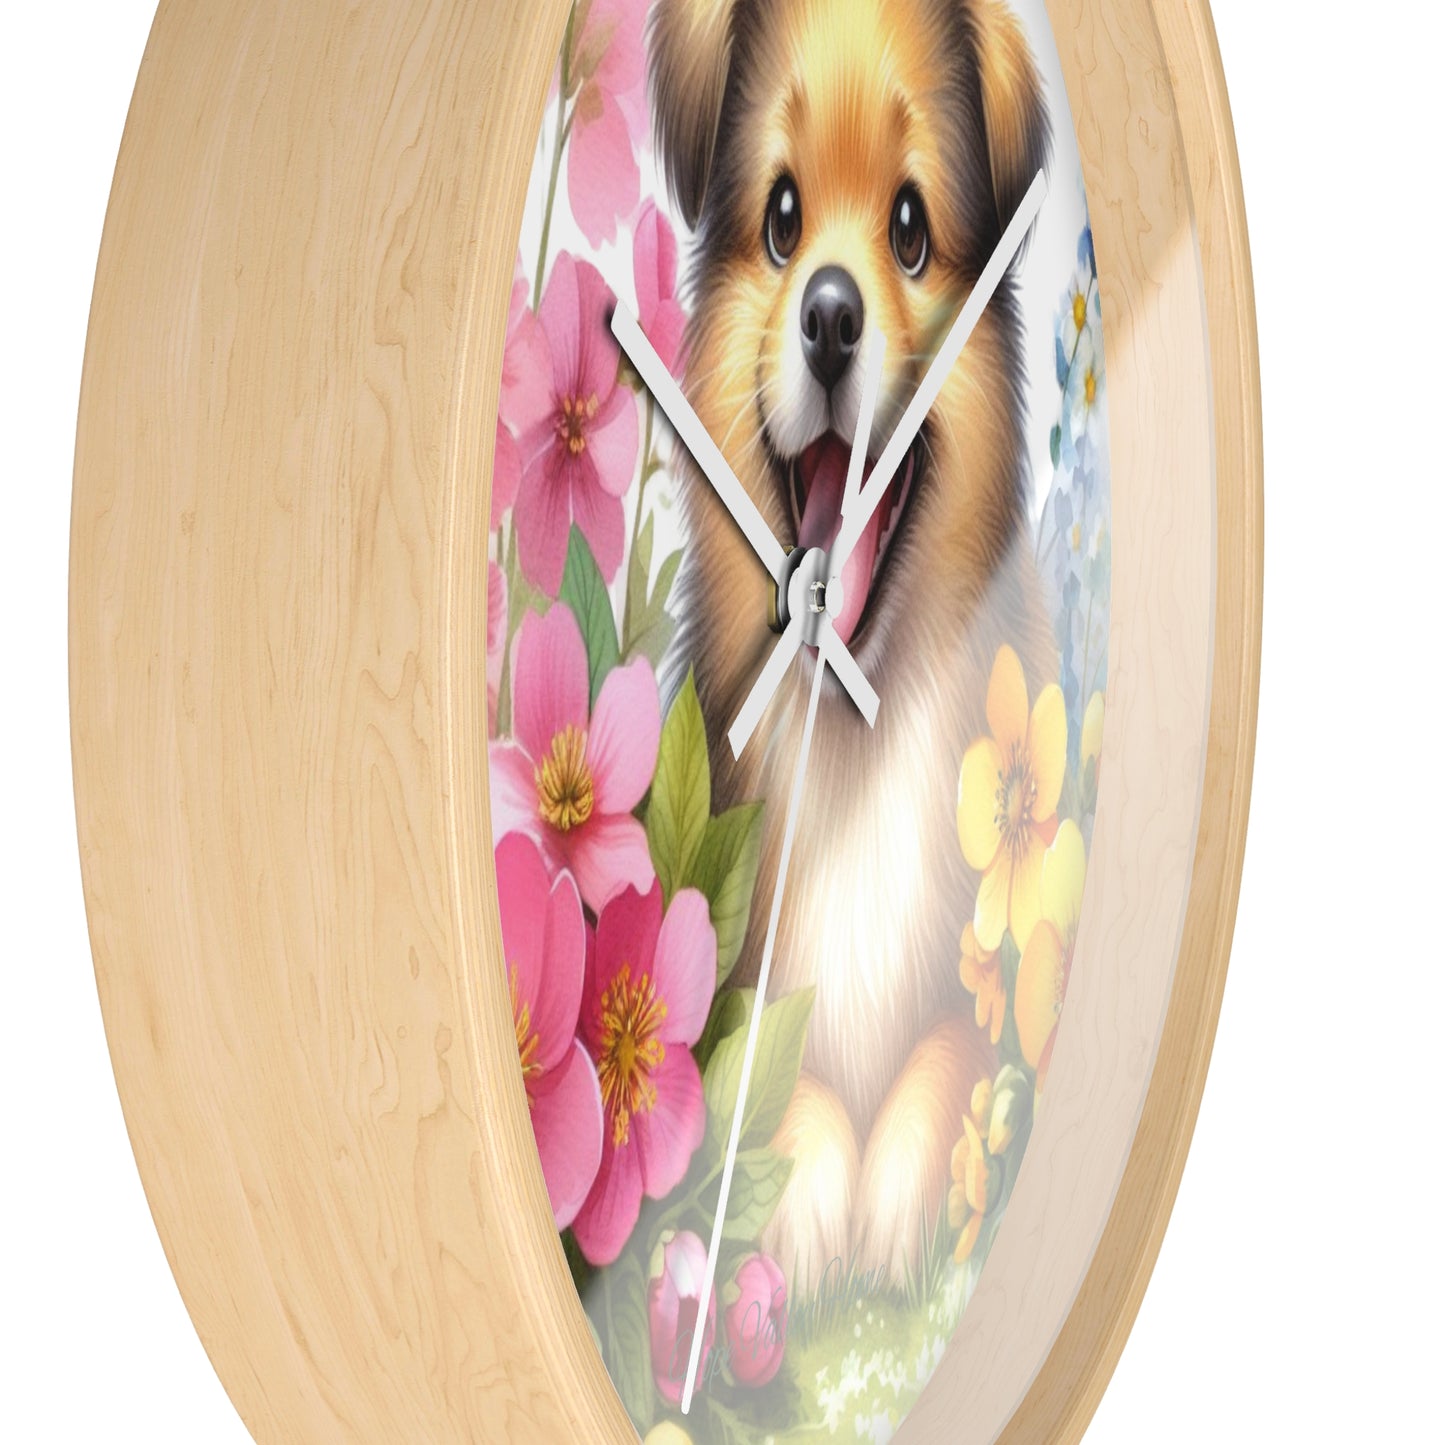 Pomeranian Wall Clock | Wall Art and Giftware by Hope Valley Home